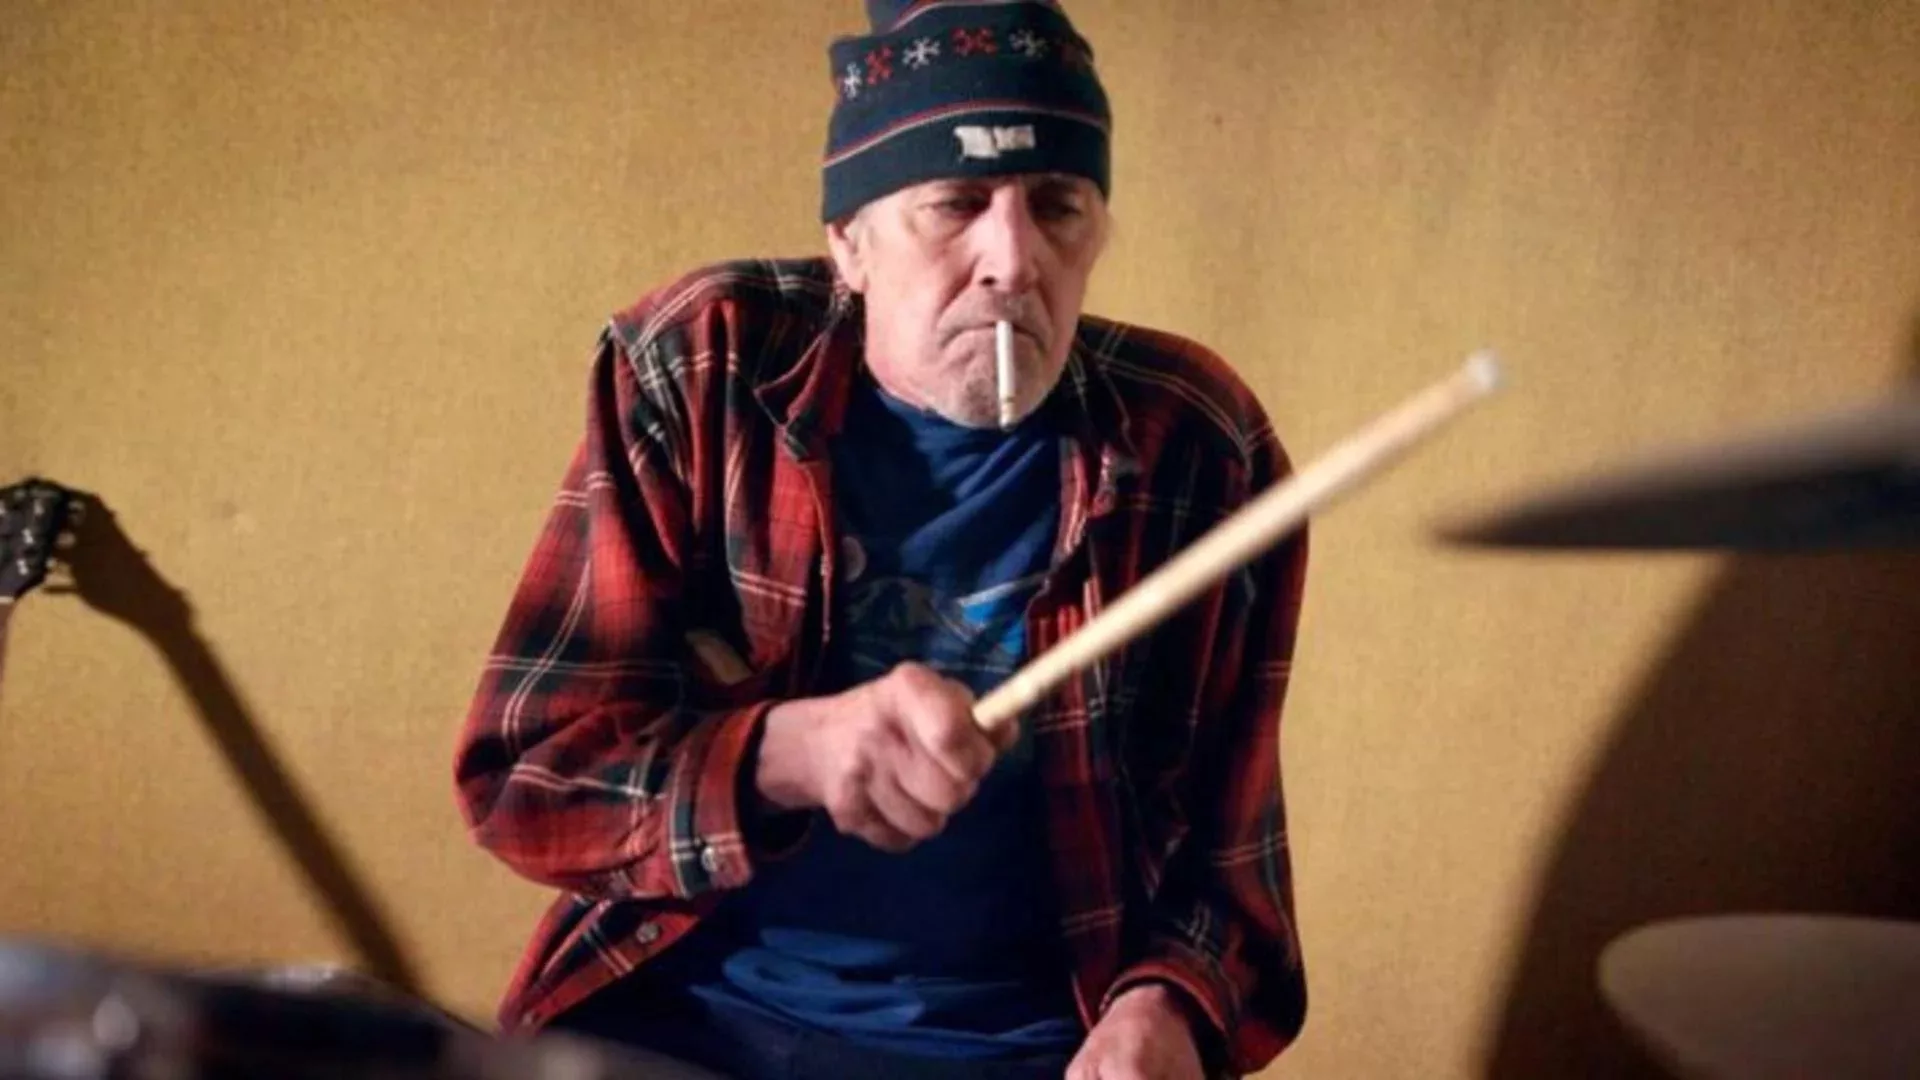 Drummer Gary Young (of indie rock royalty Pavement) drums with a cigarette in his mouth